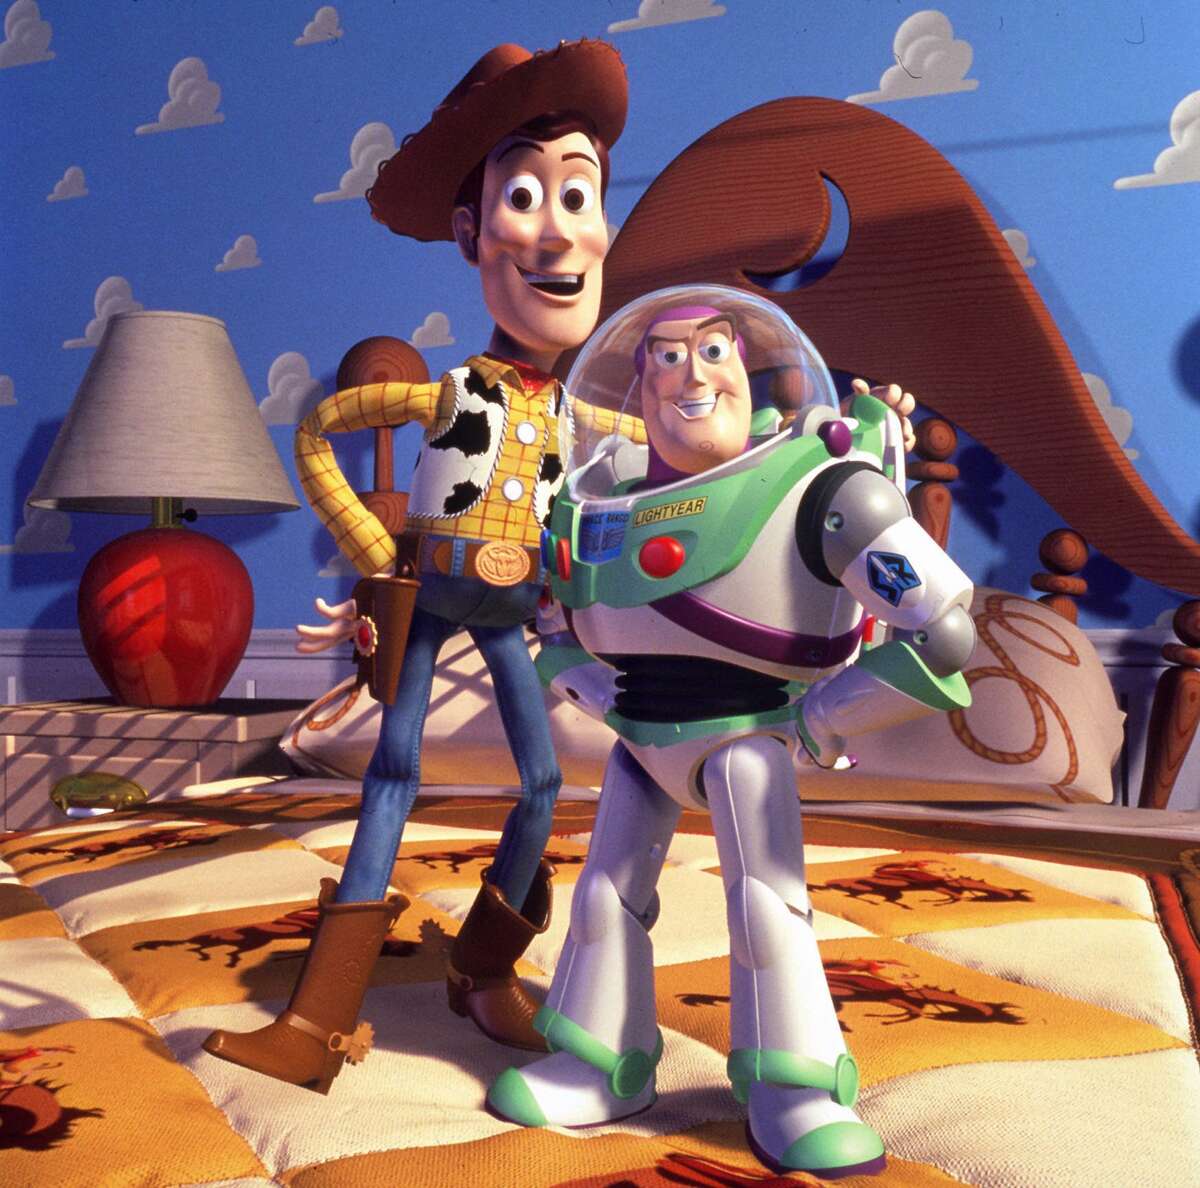 The Drive-In at Sawyer Yards screens “Toy Story.”